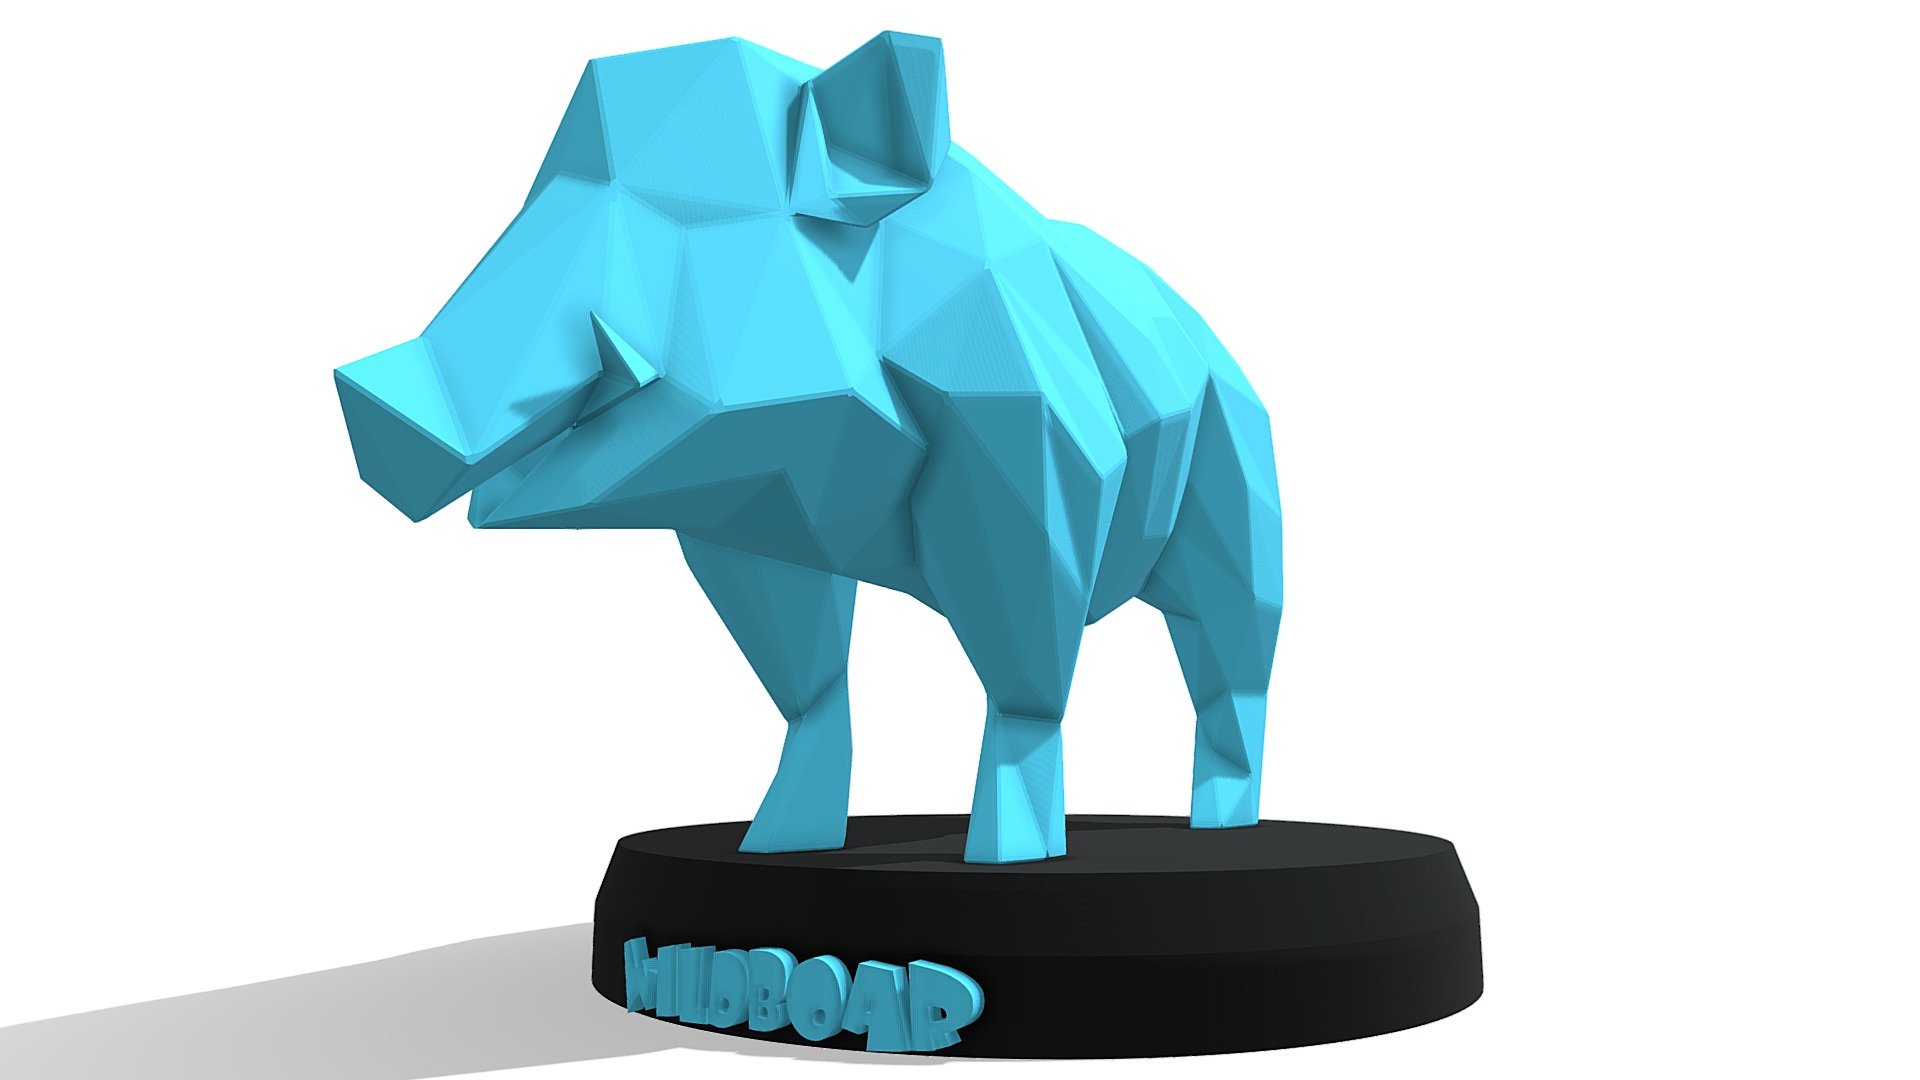 Polygonal 3D Model with Parametric modeling with gold material, make it recommend for :




Basic modeling 

Rigging 

sculpting 

Become Statue

Decorate

3D Print File

Toy

Have fun  :) - Poly wildboar - Buy Royalty Free 3D model by Puppy3D 3d model